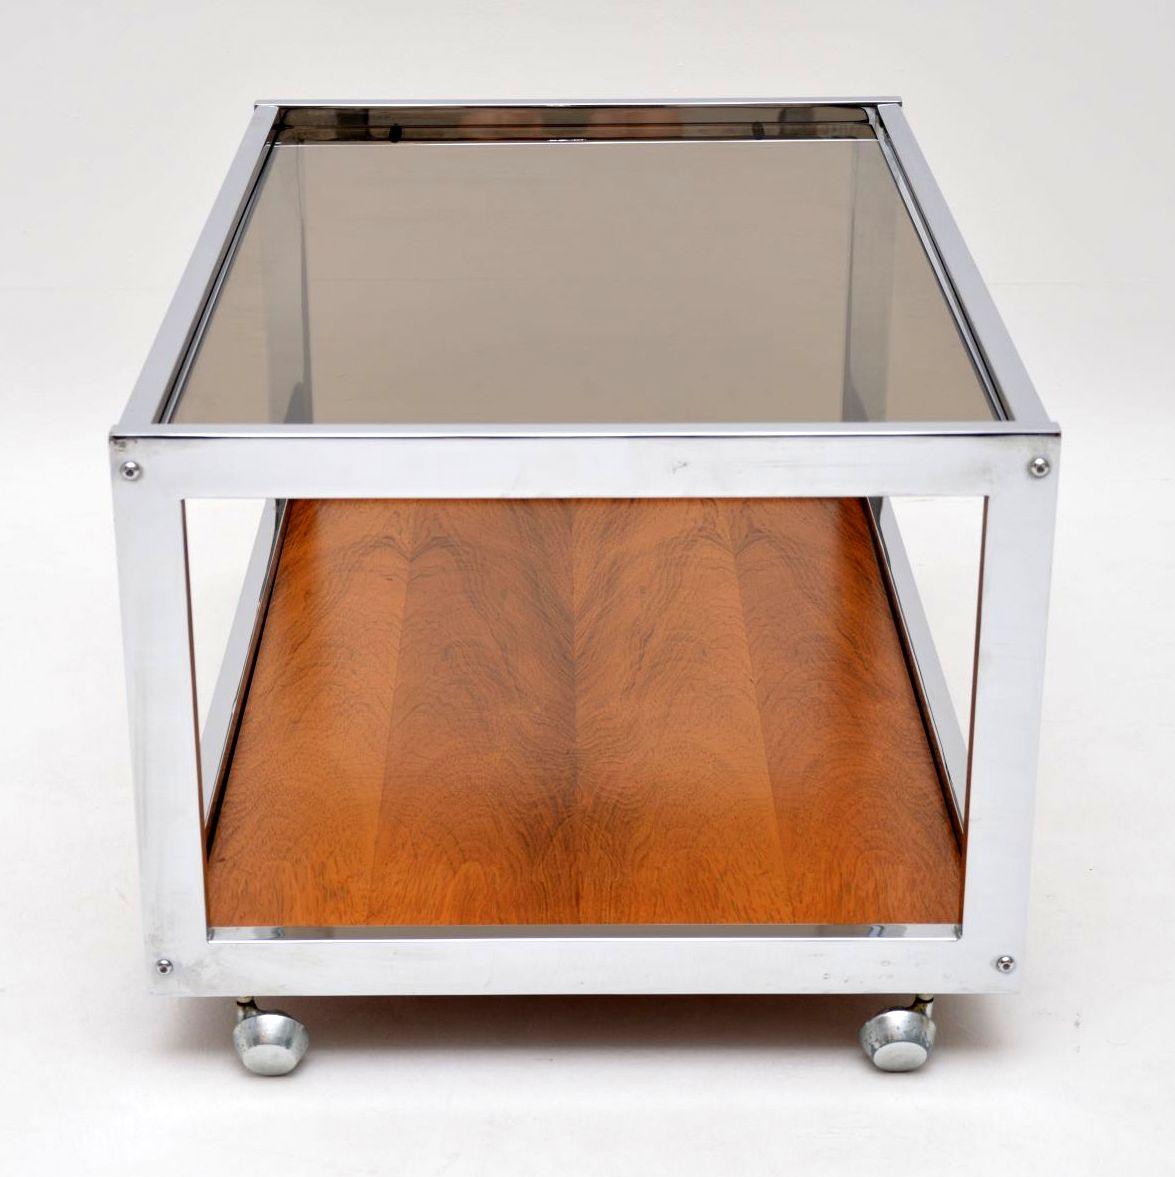 British 1970s Vintage Chrome Coffee Table by Howard Miller Associates